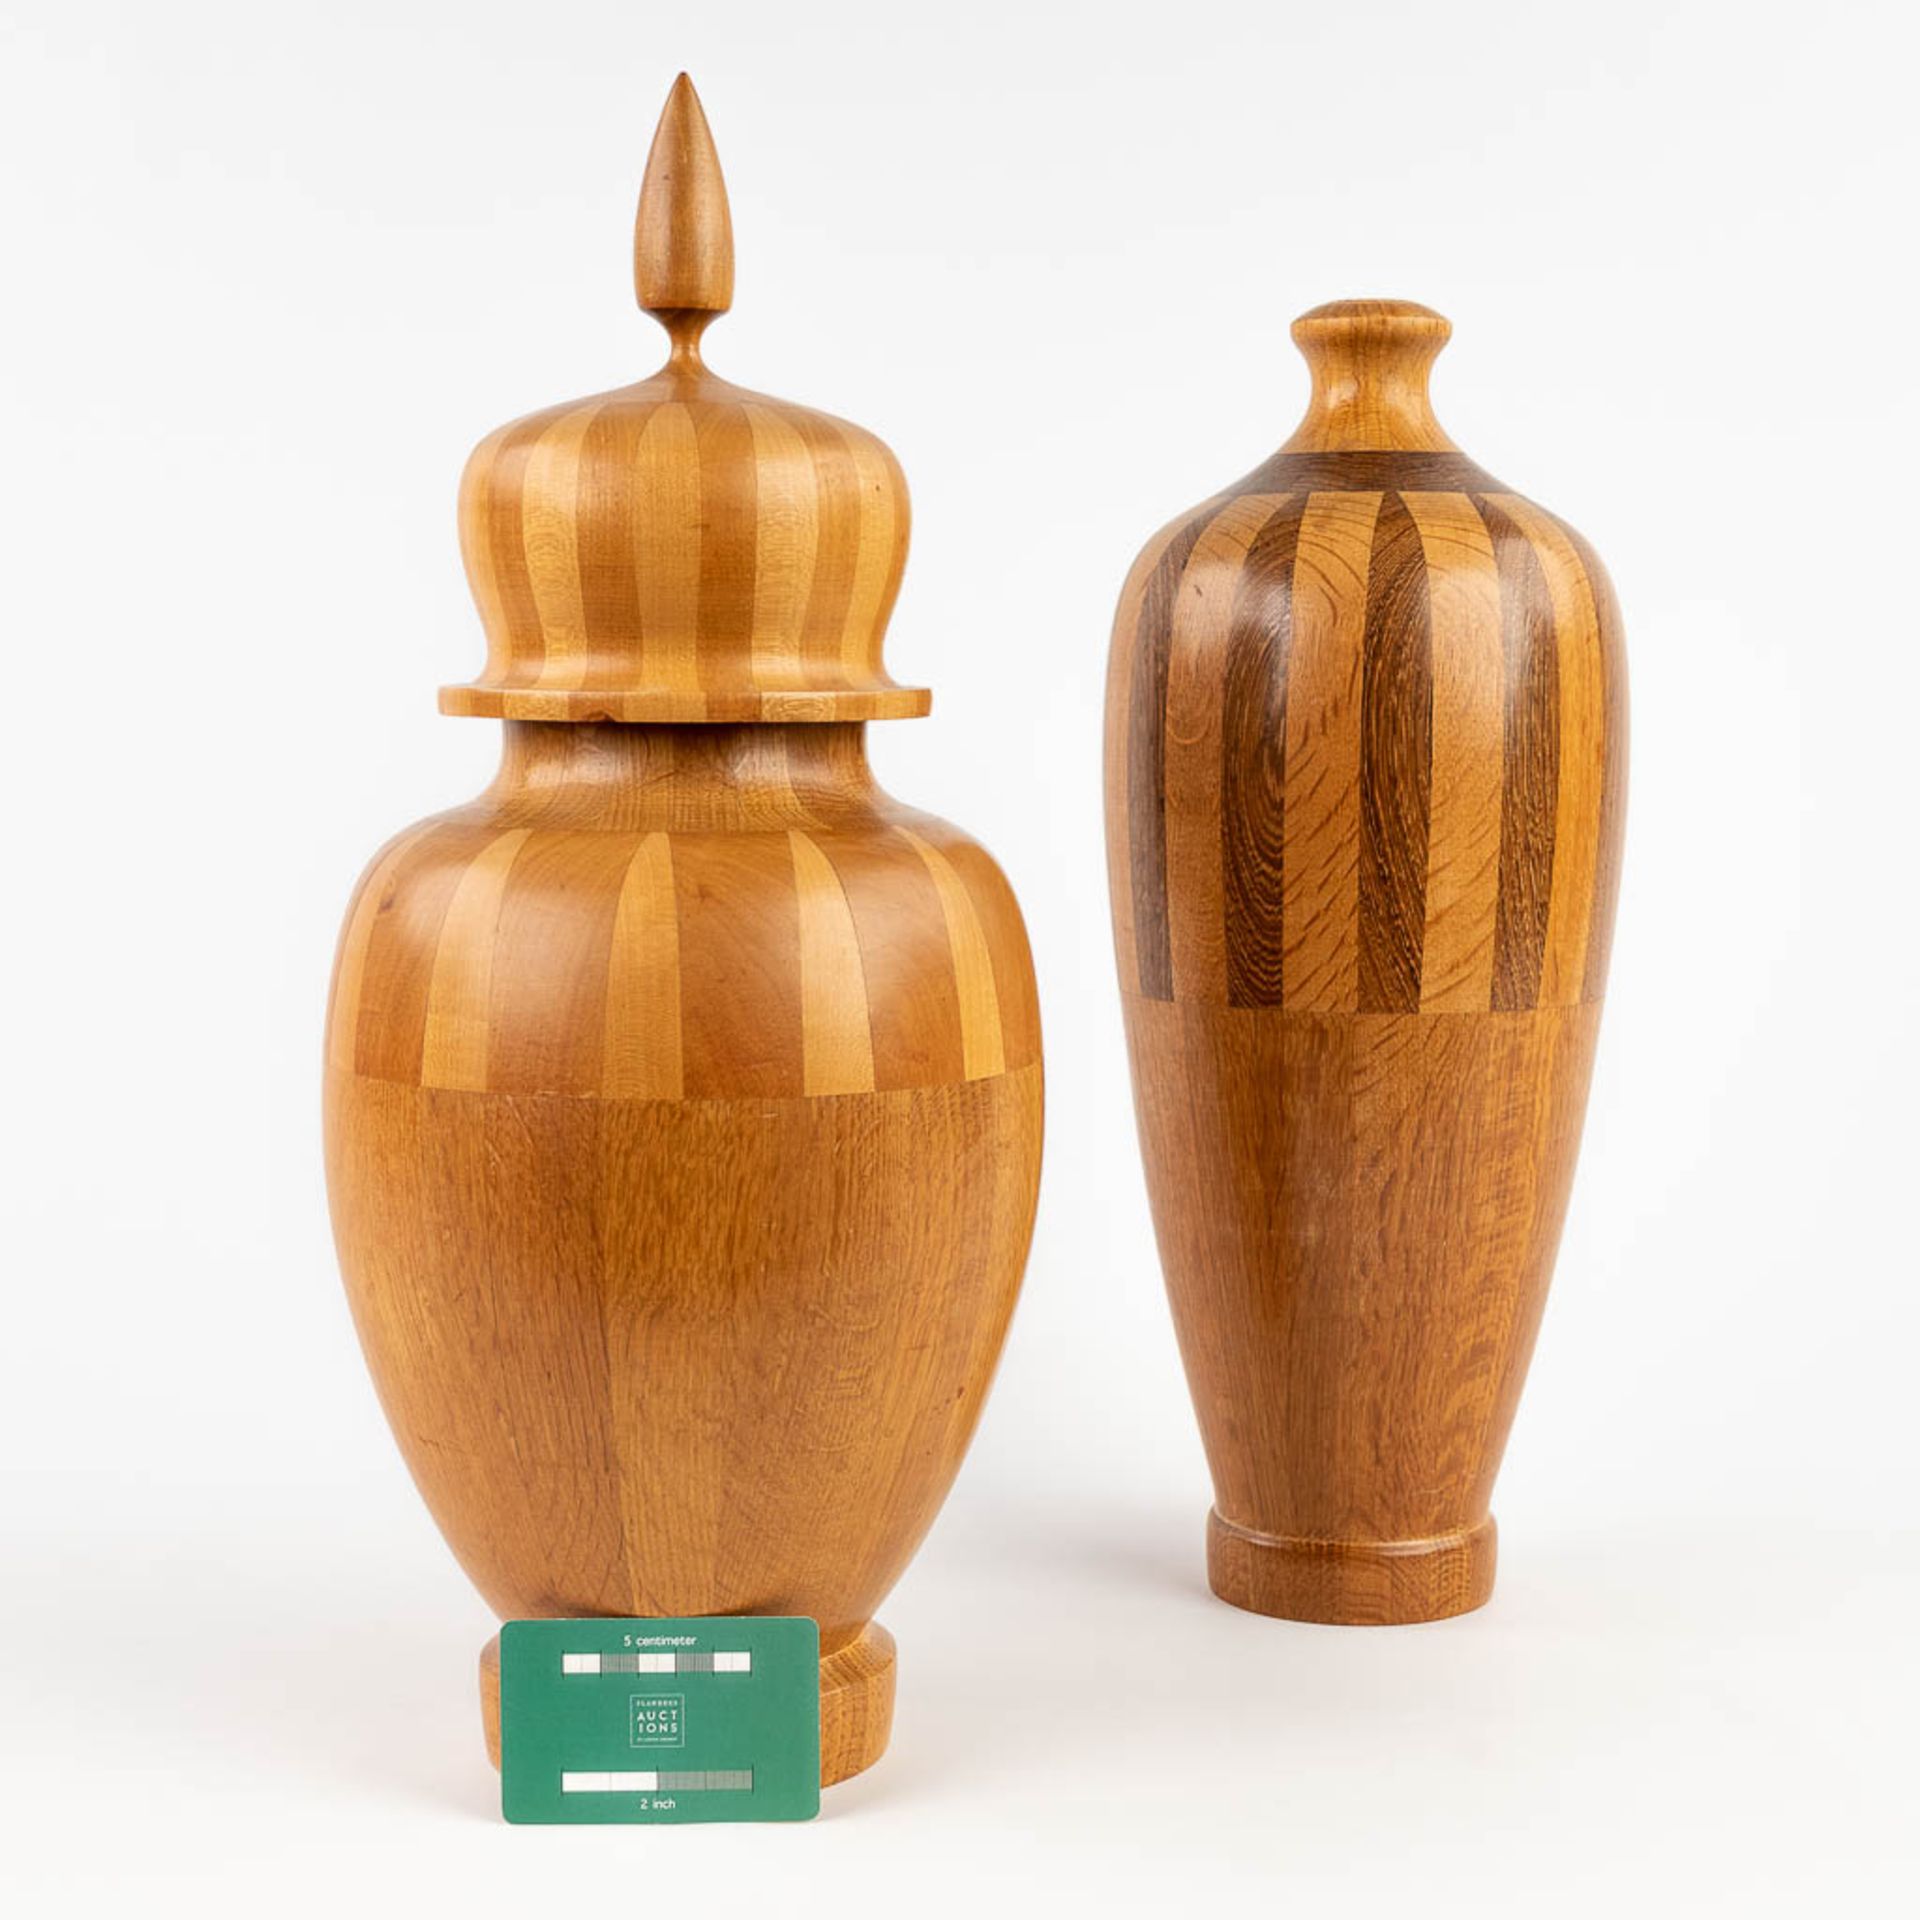 A collection of 2 wood-turned vases, made of wood. circa 1960. (H: 43 x D: 16 cm) - Image 2 of 11